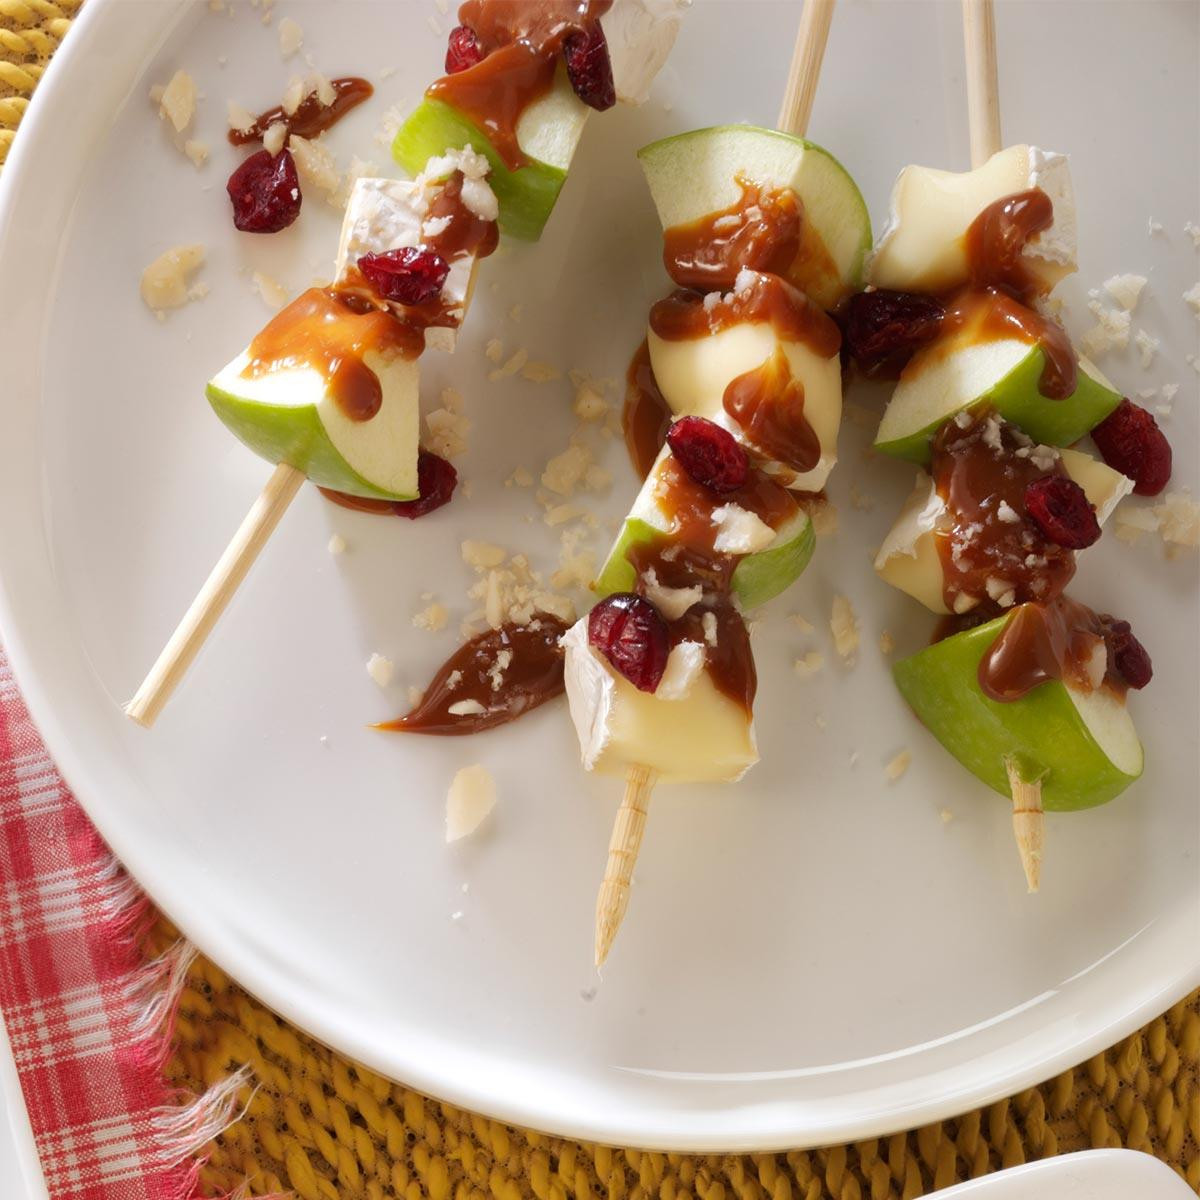 Apple Appetizer Recipes
 Caramel Apple and Brie Skewers Recipe